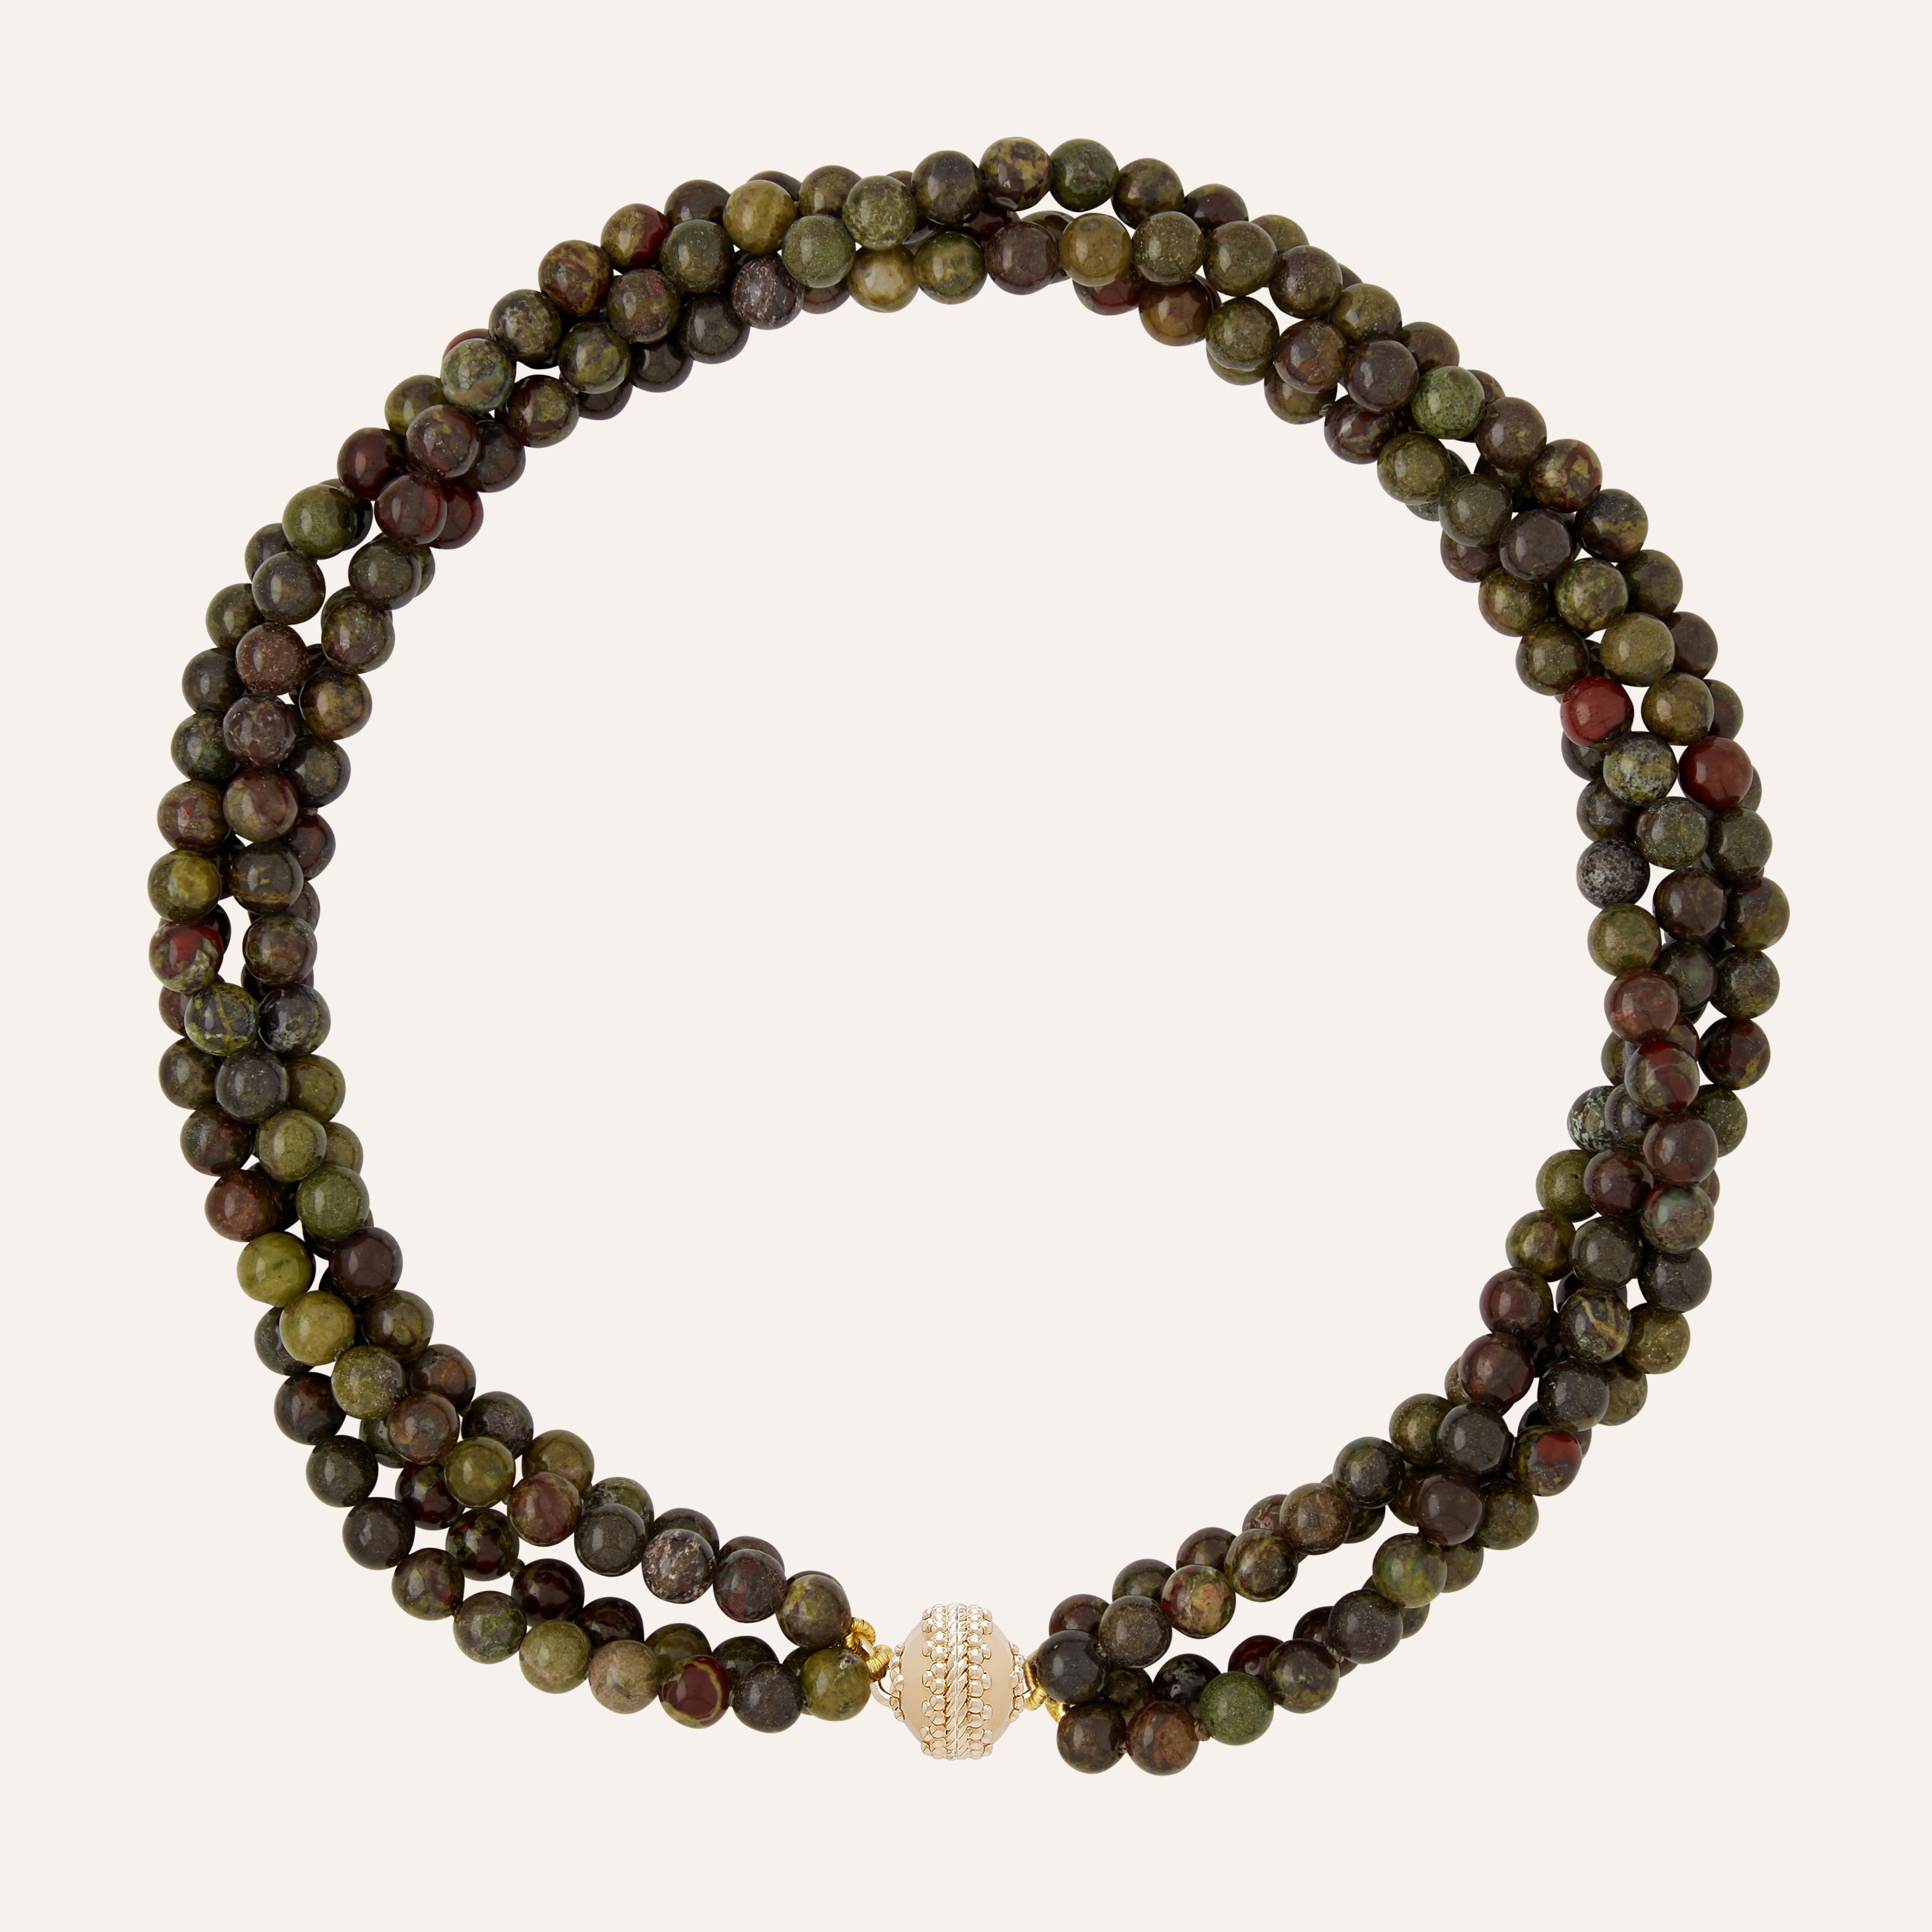 Victoire African Dragon Bloodstone 6mm Multi-Strand Necklace